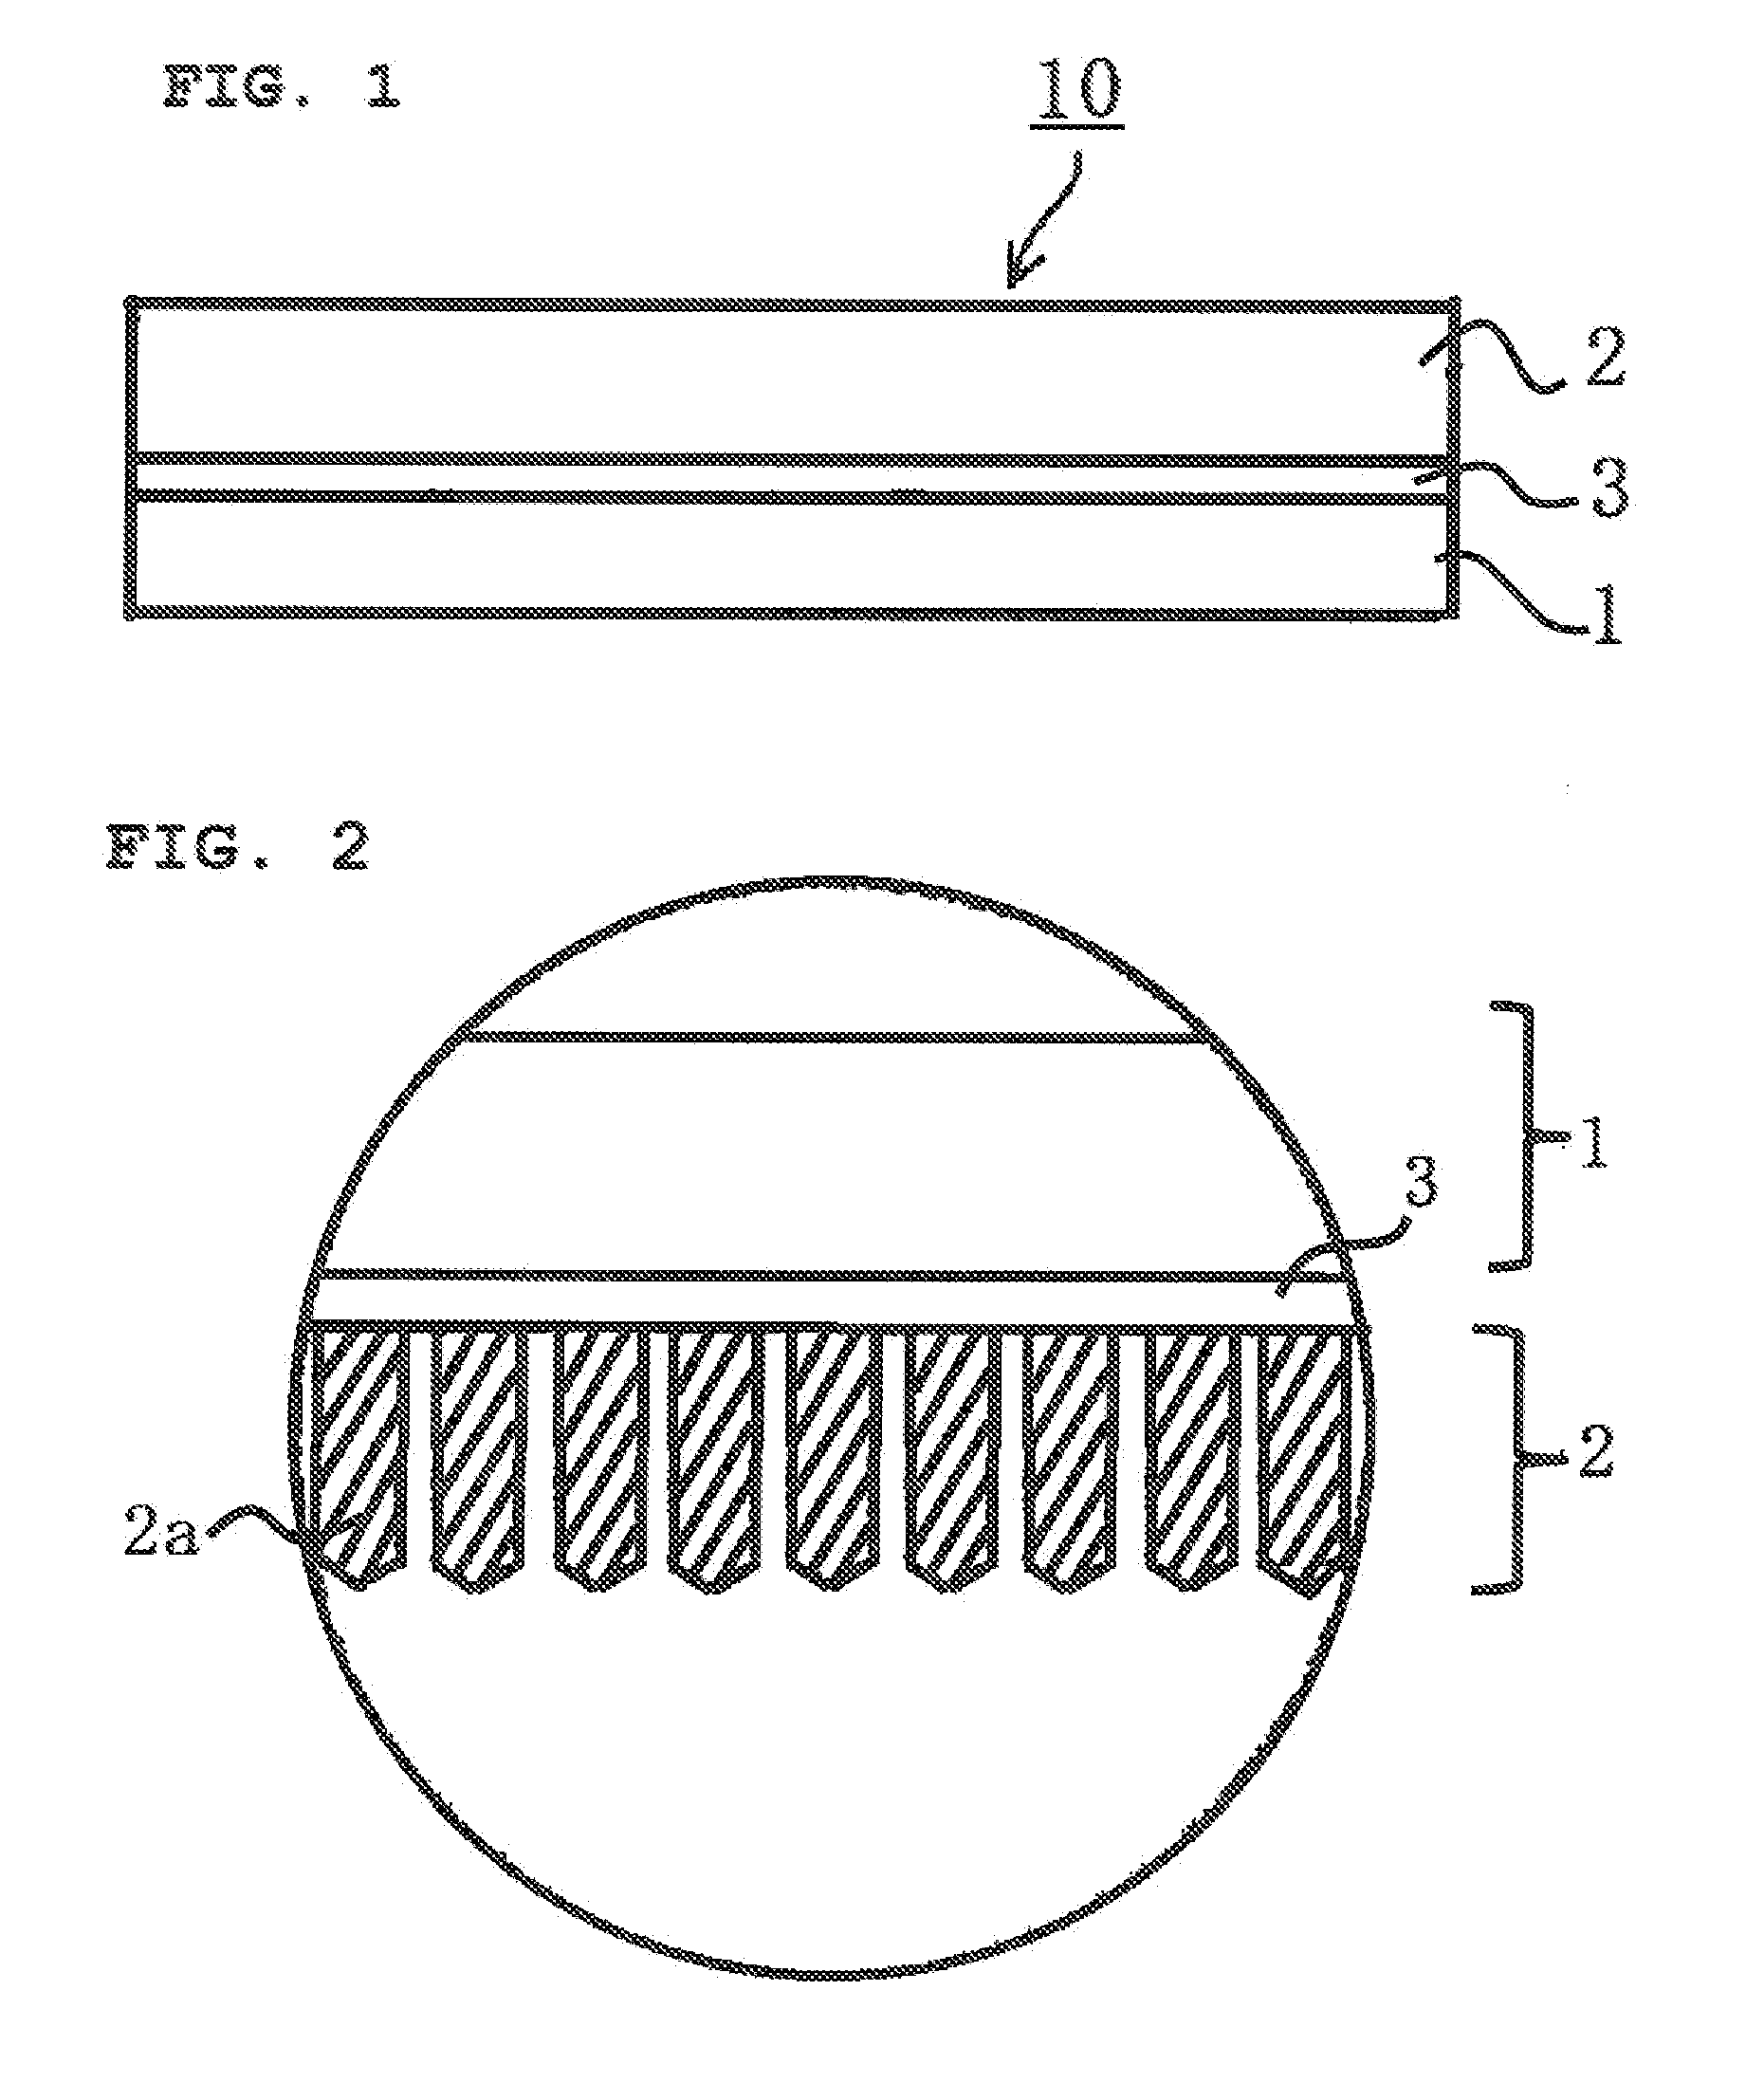 Deposition substrate and scintillator panel